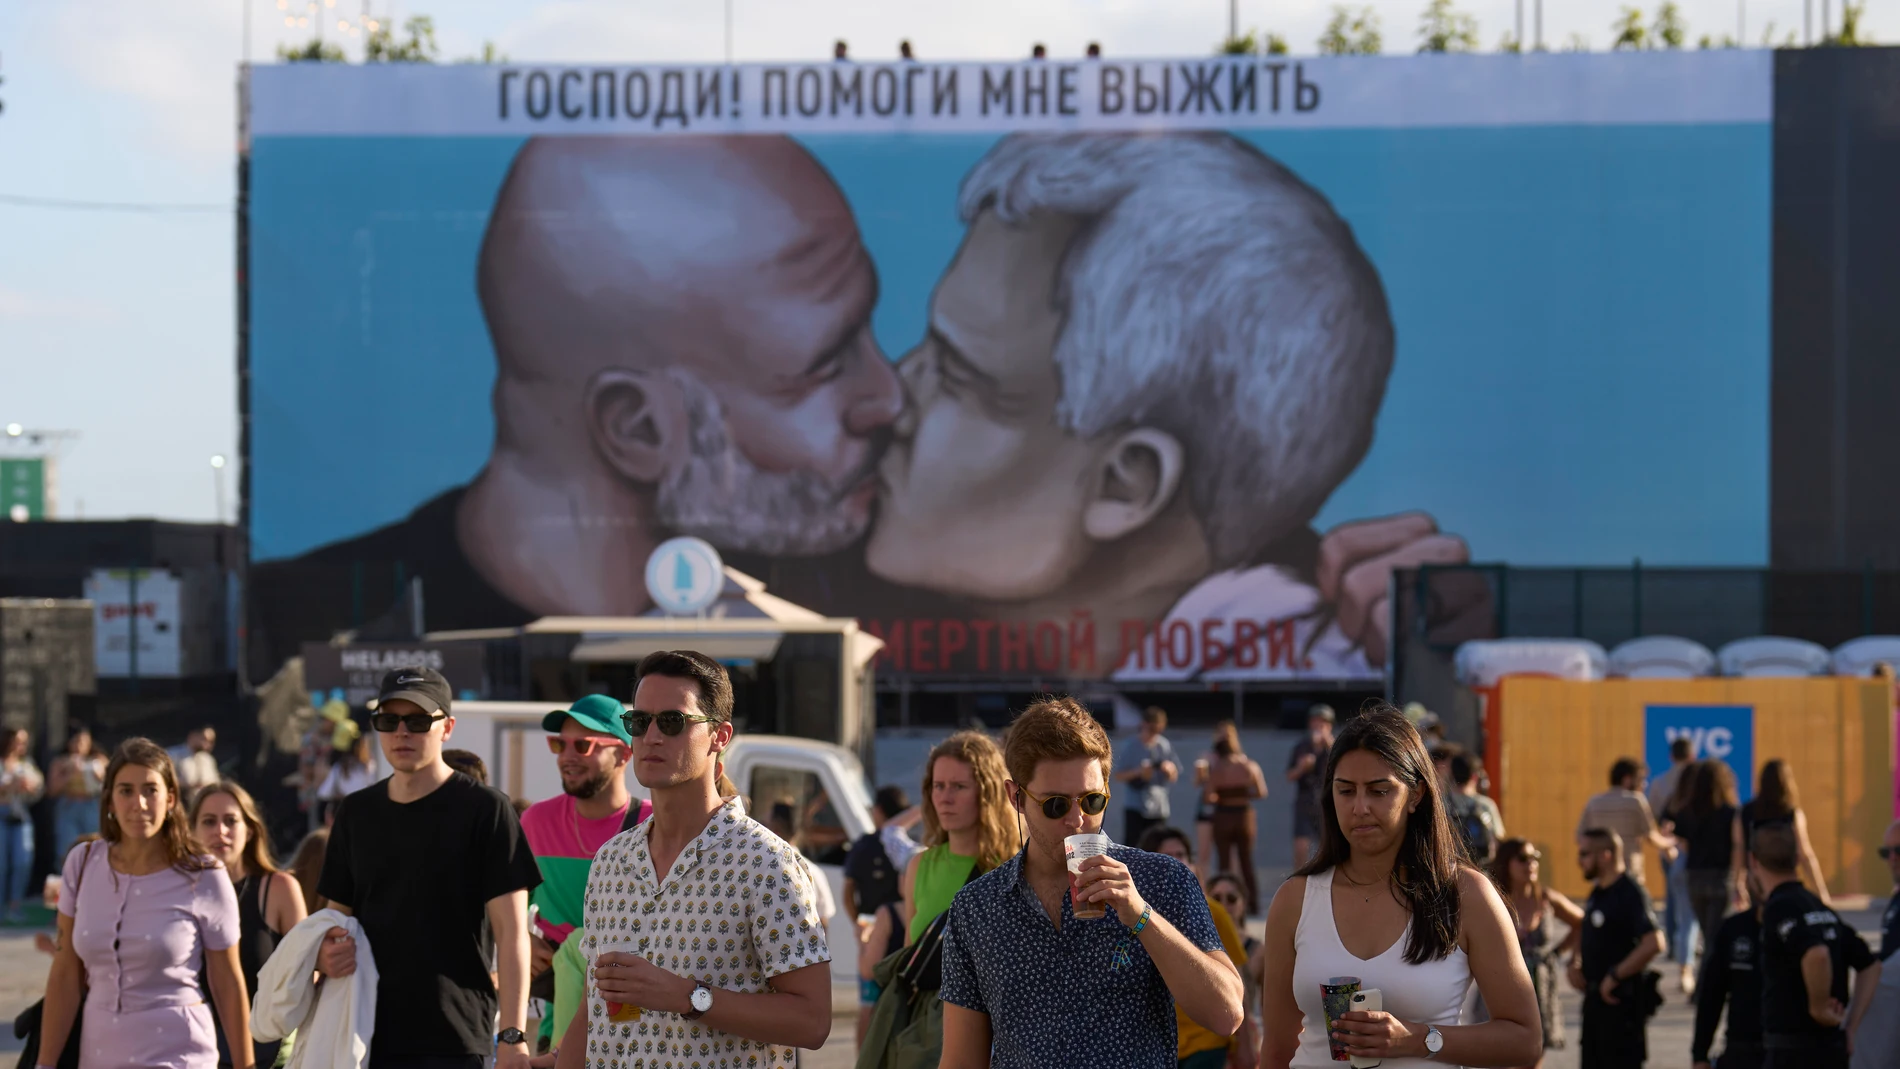 Football fans take it to the Next level with Guardiola kissing Mourinho mural